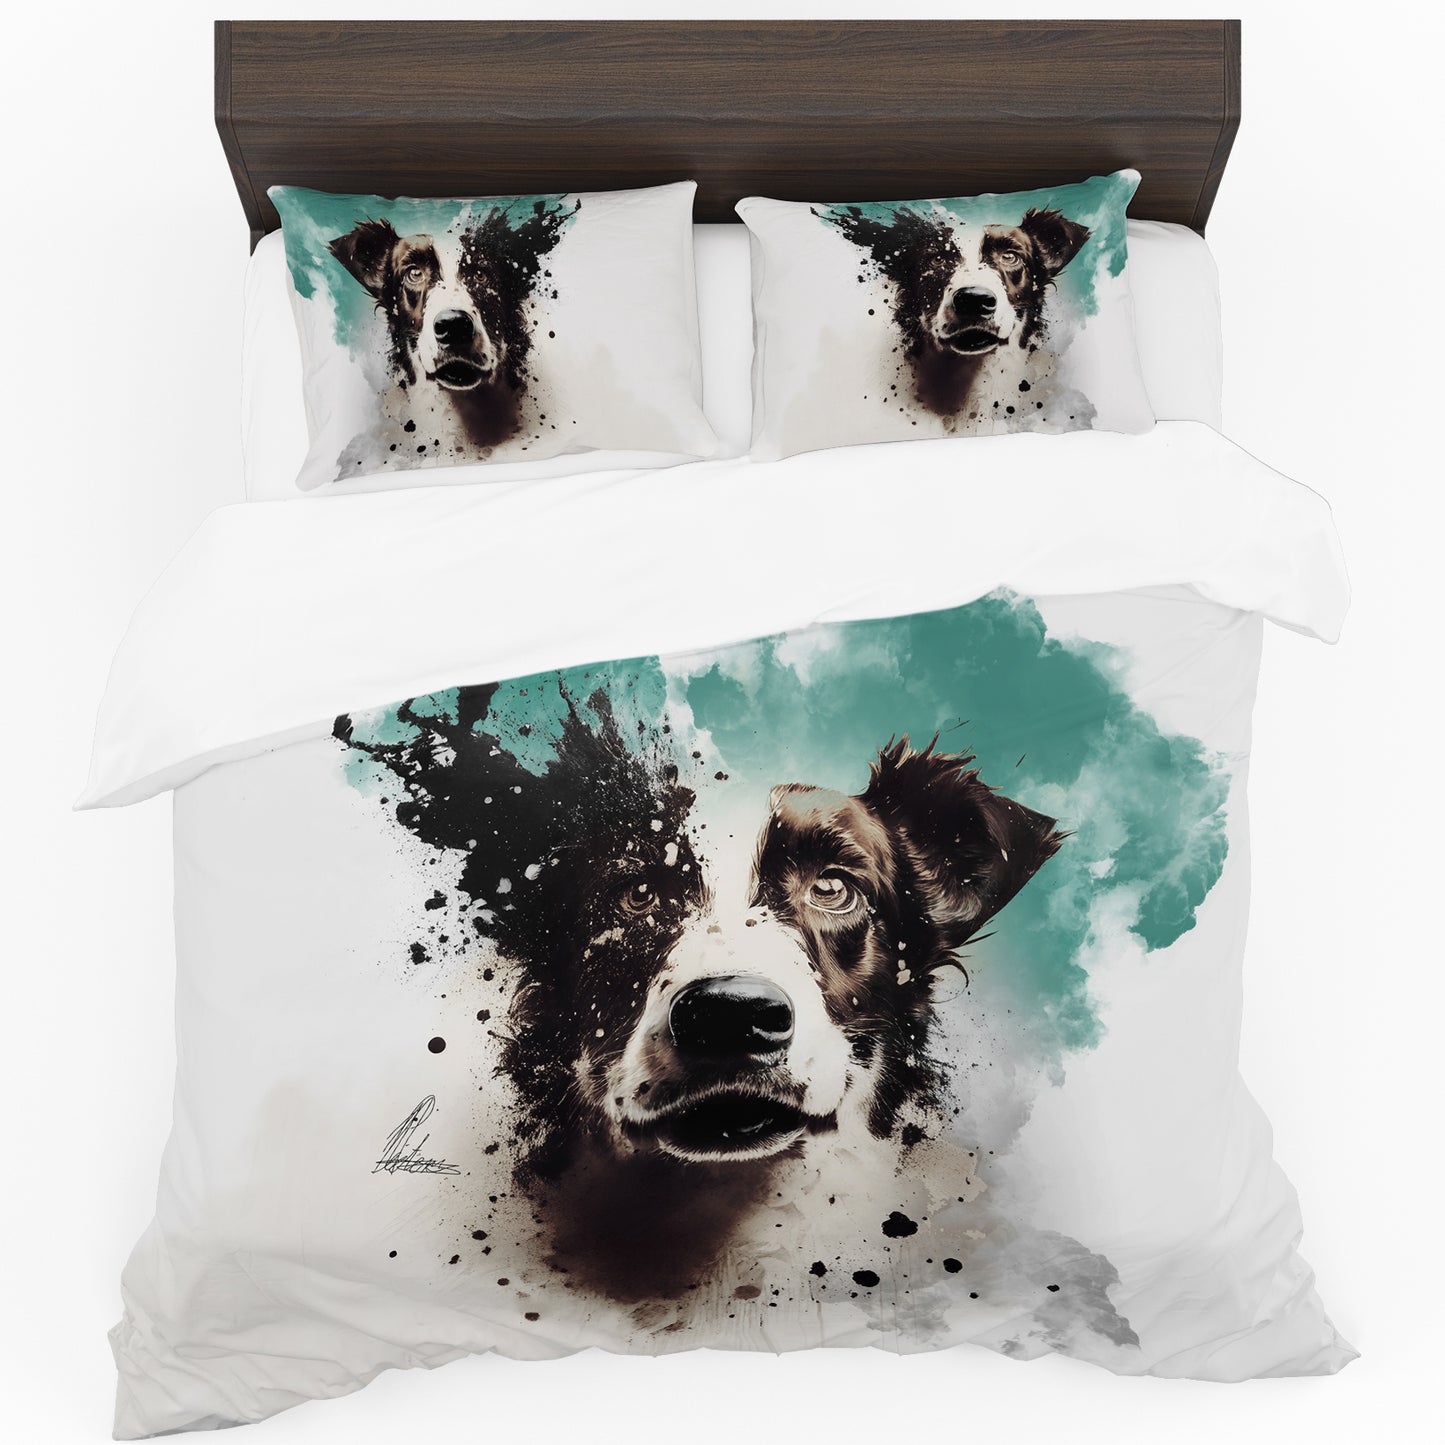 Woof By Nathan Pieterse Duvet Cover Set